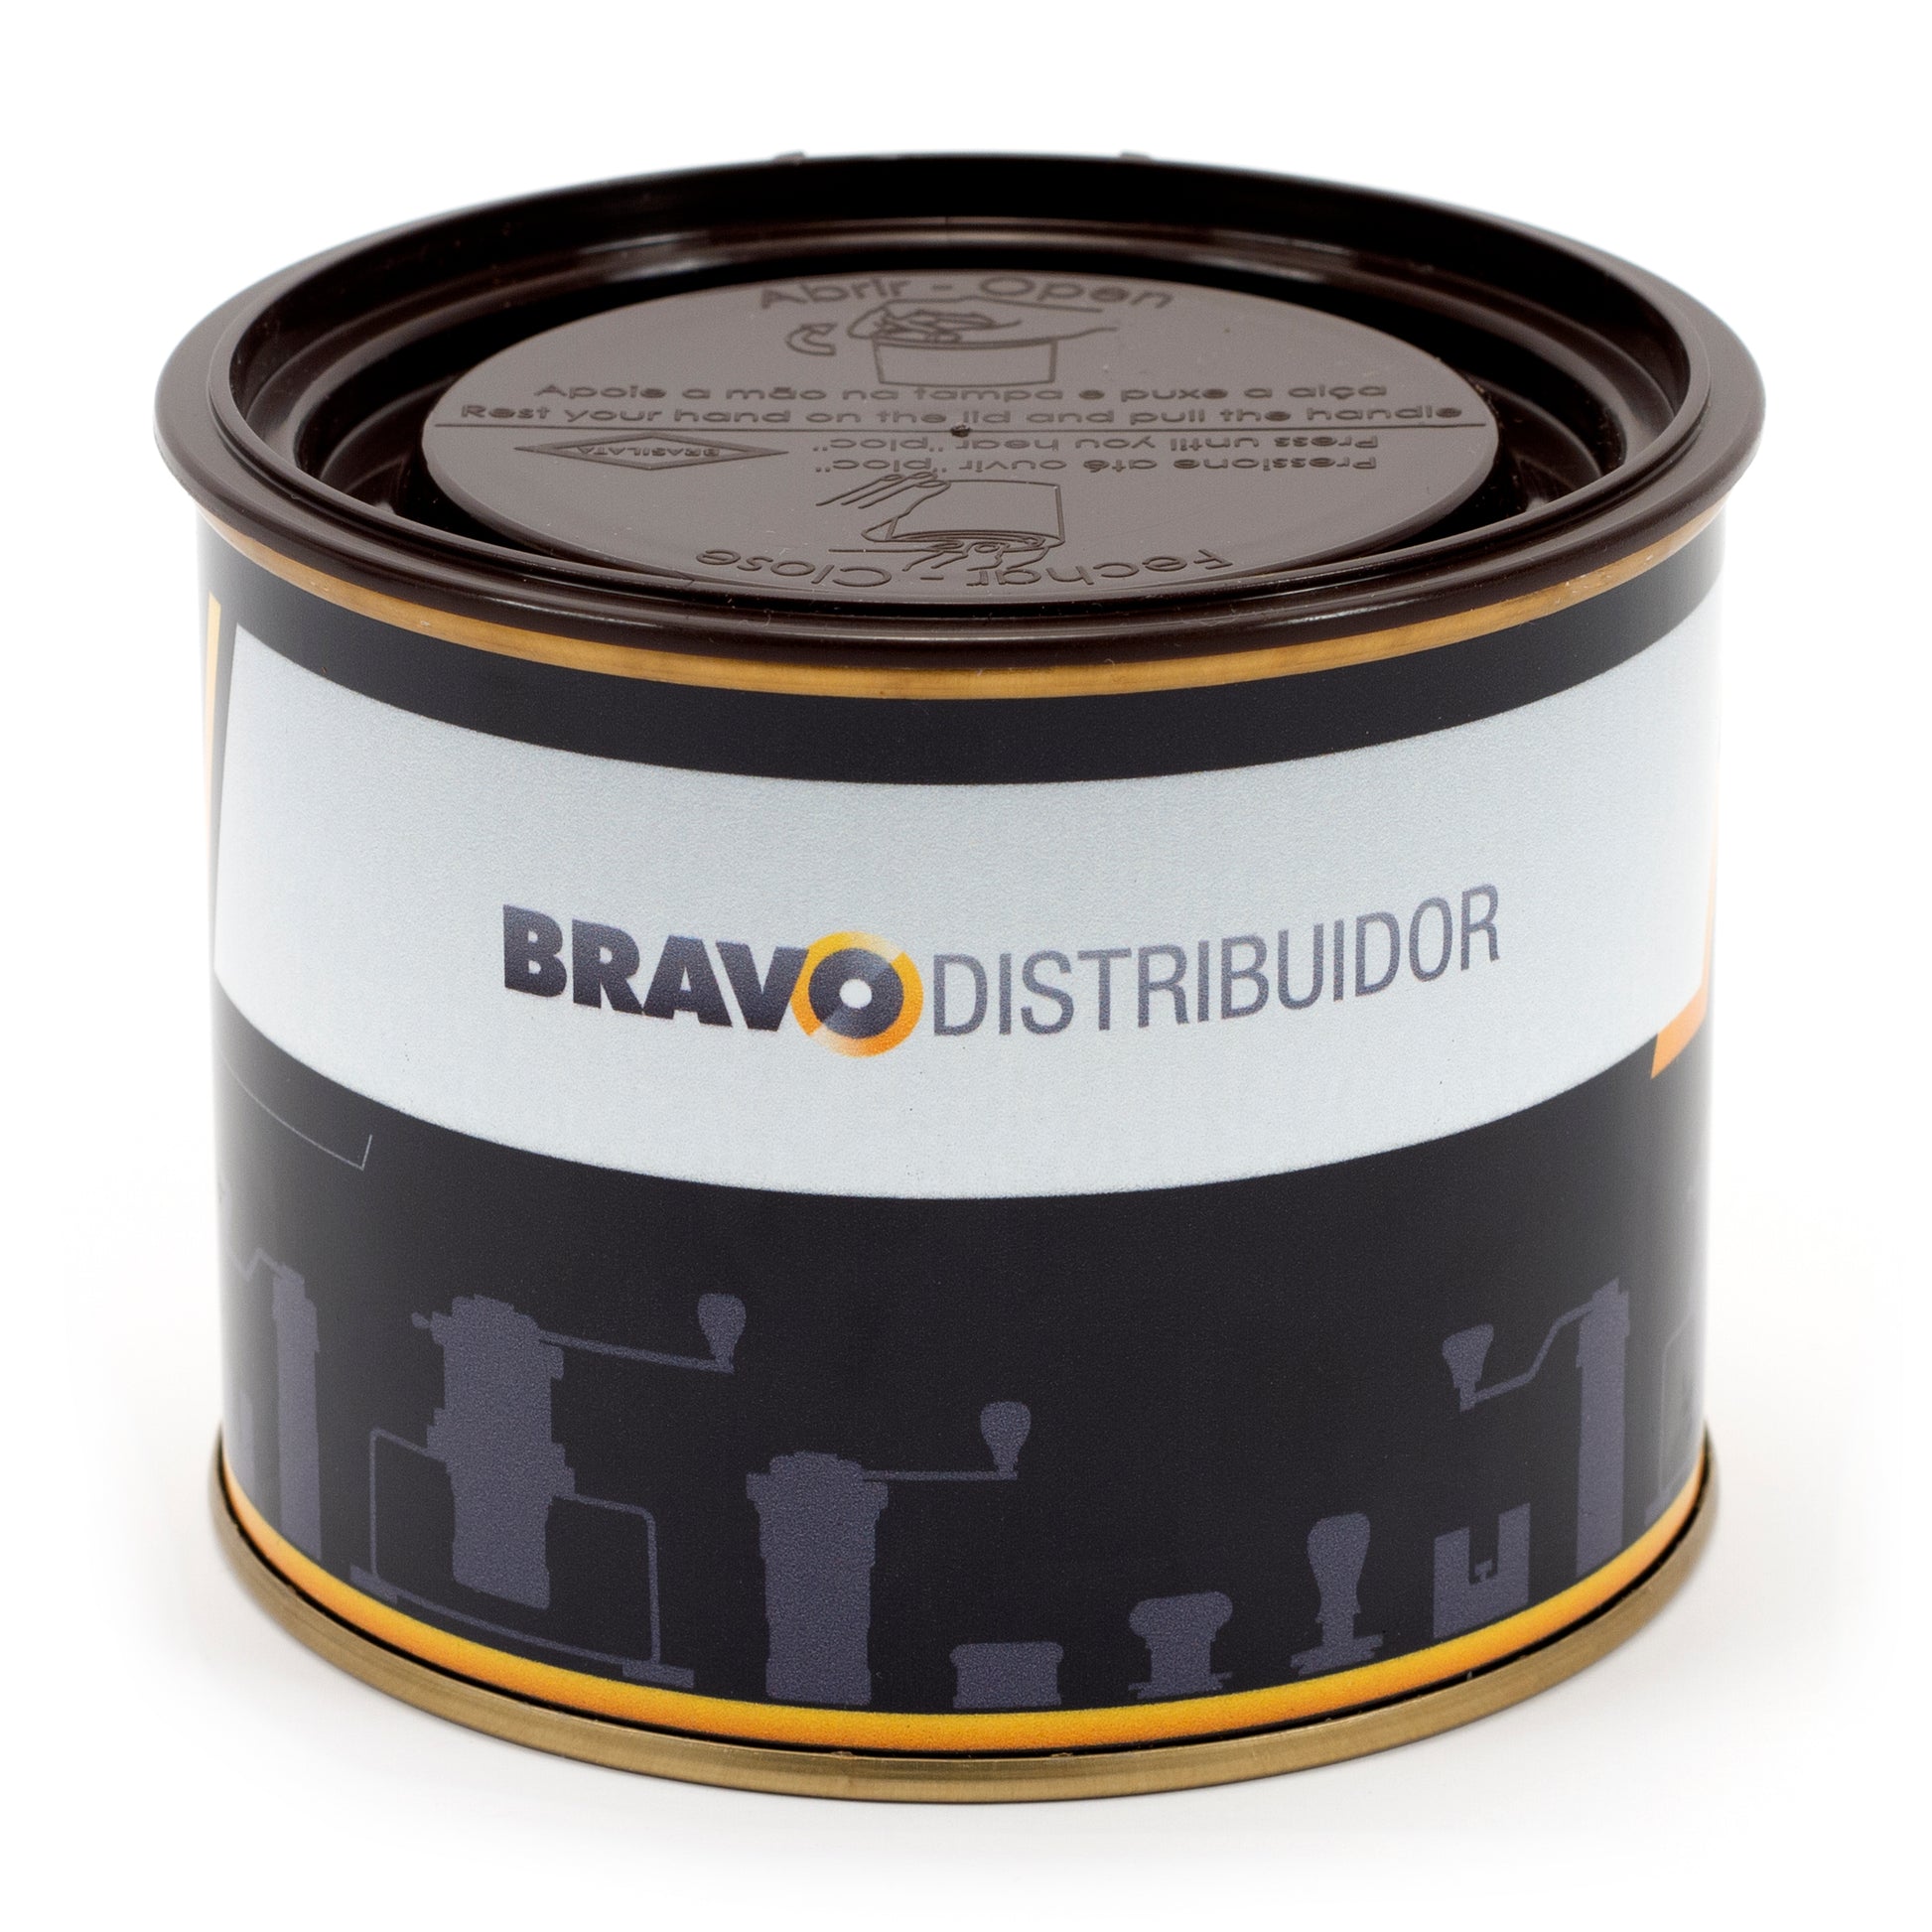 Bravo Distribuidor canister packaging.